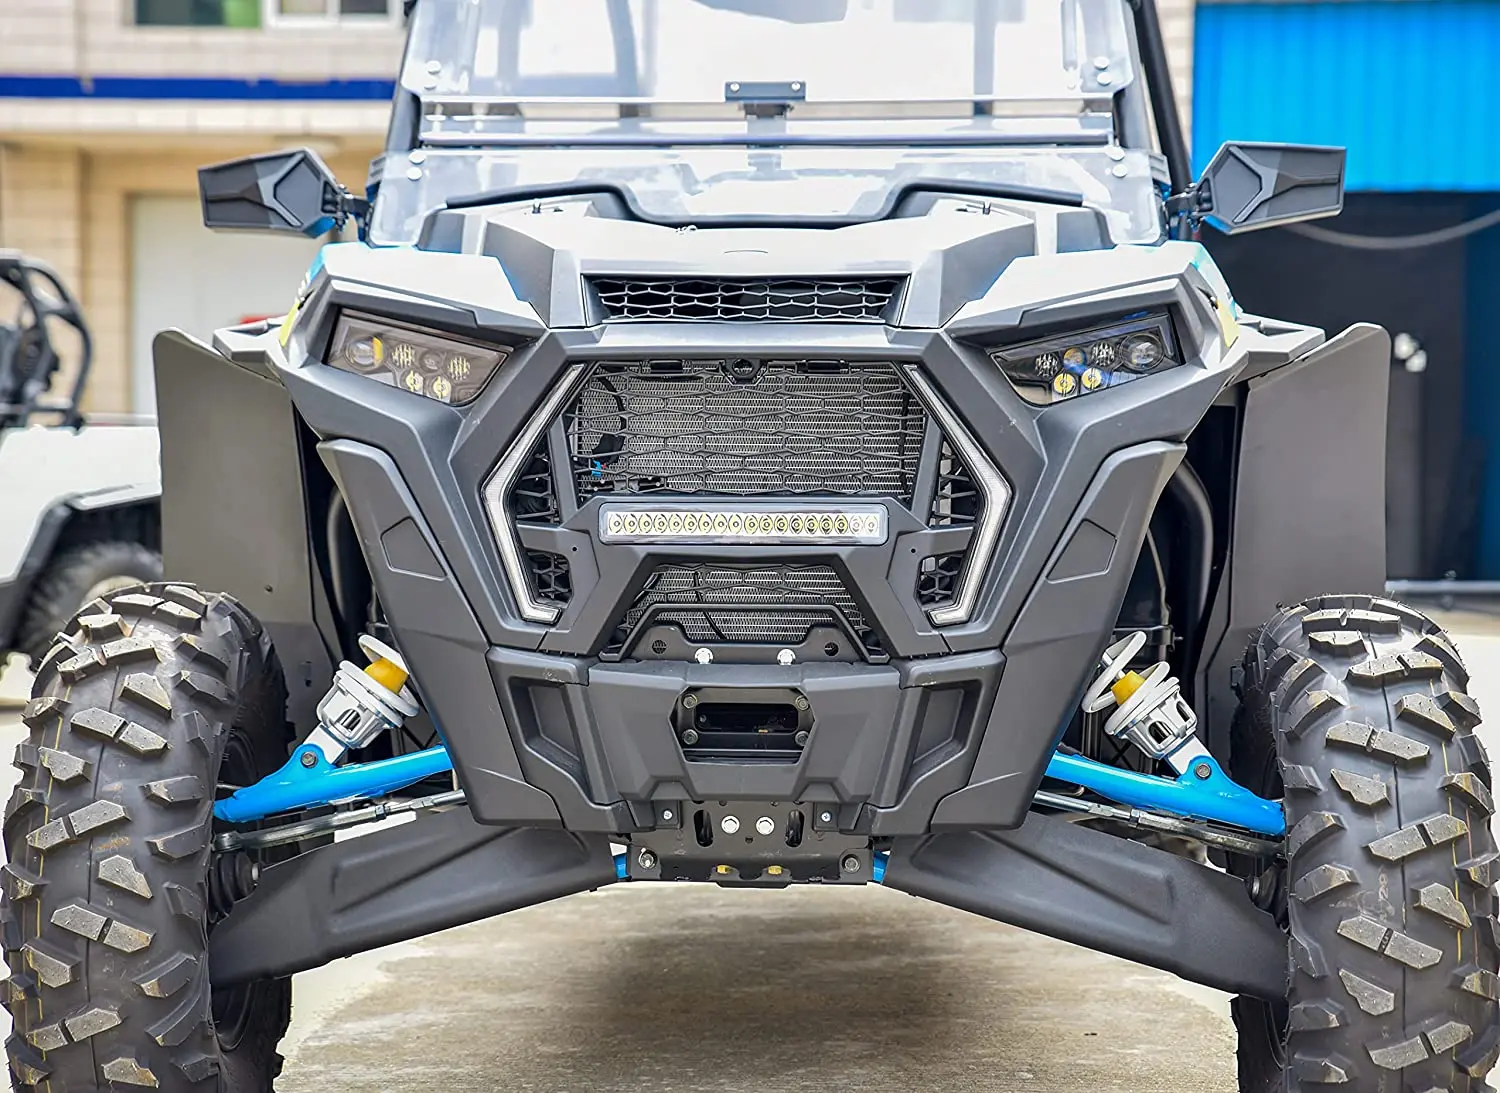 2021 New RGBW Led Fang Running Turn Signal Accent Lights For 18-21 Polaris Rzr Xp 4 1000 Turbo